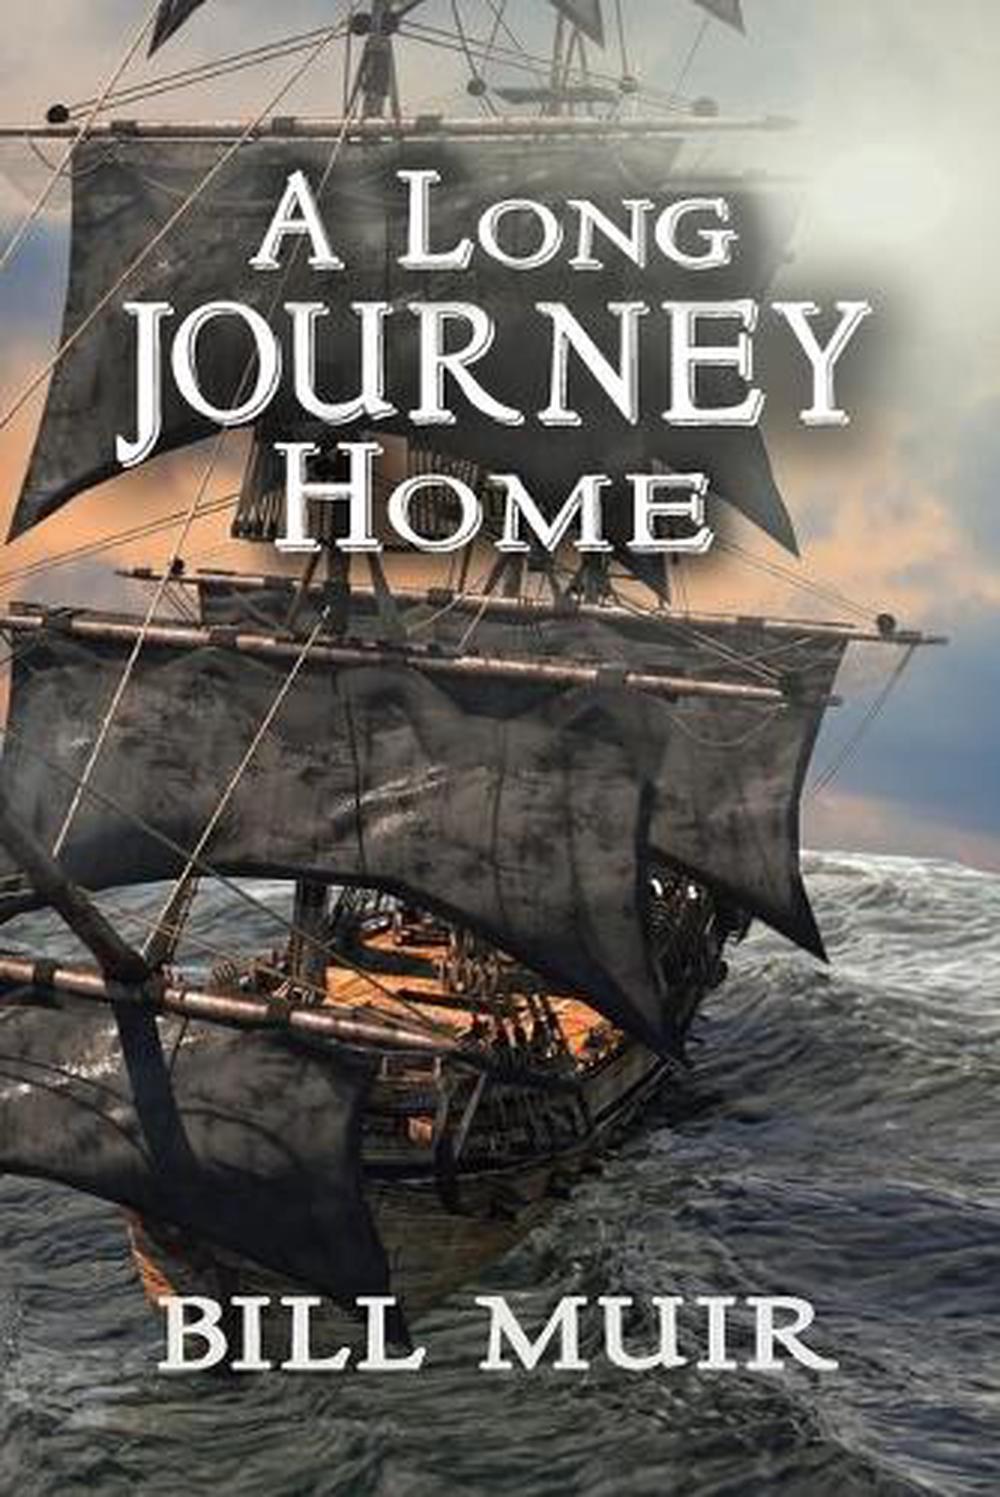 a long journey home book price